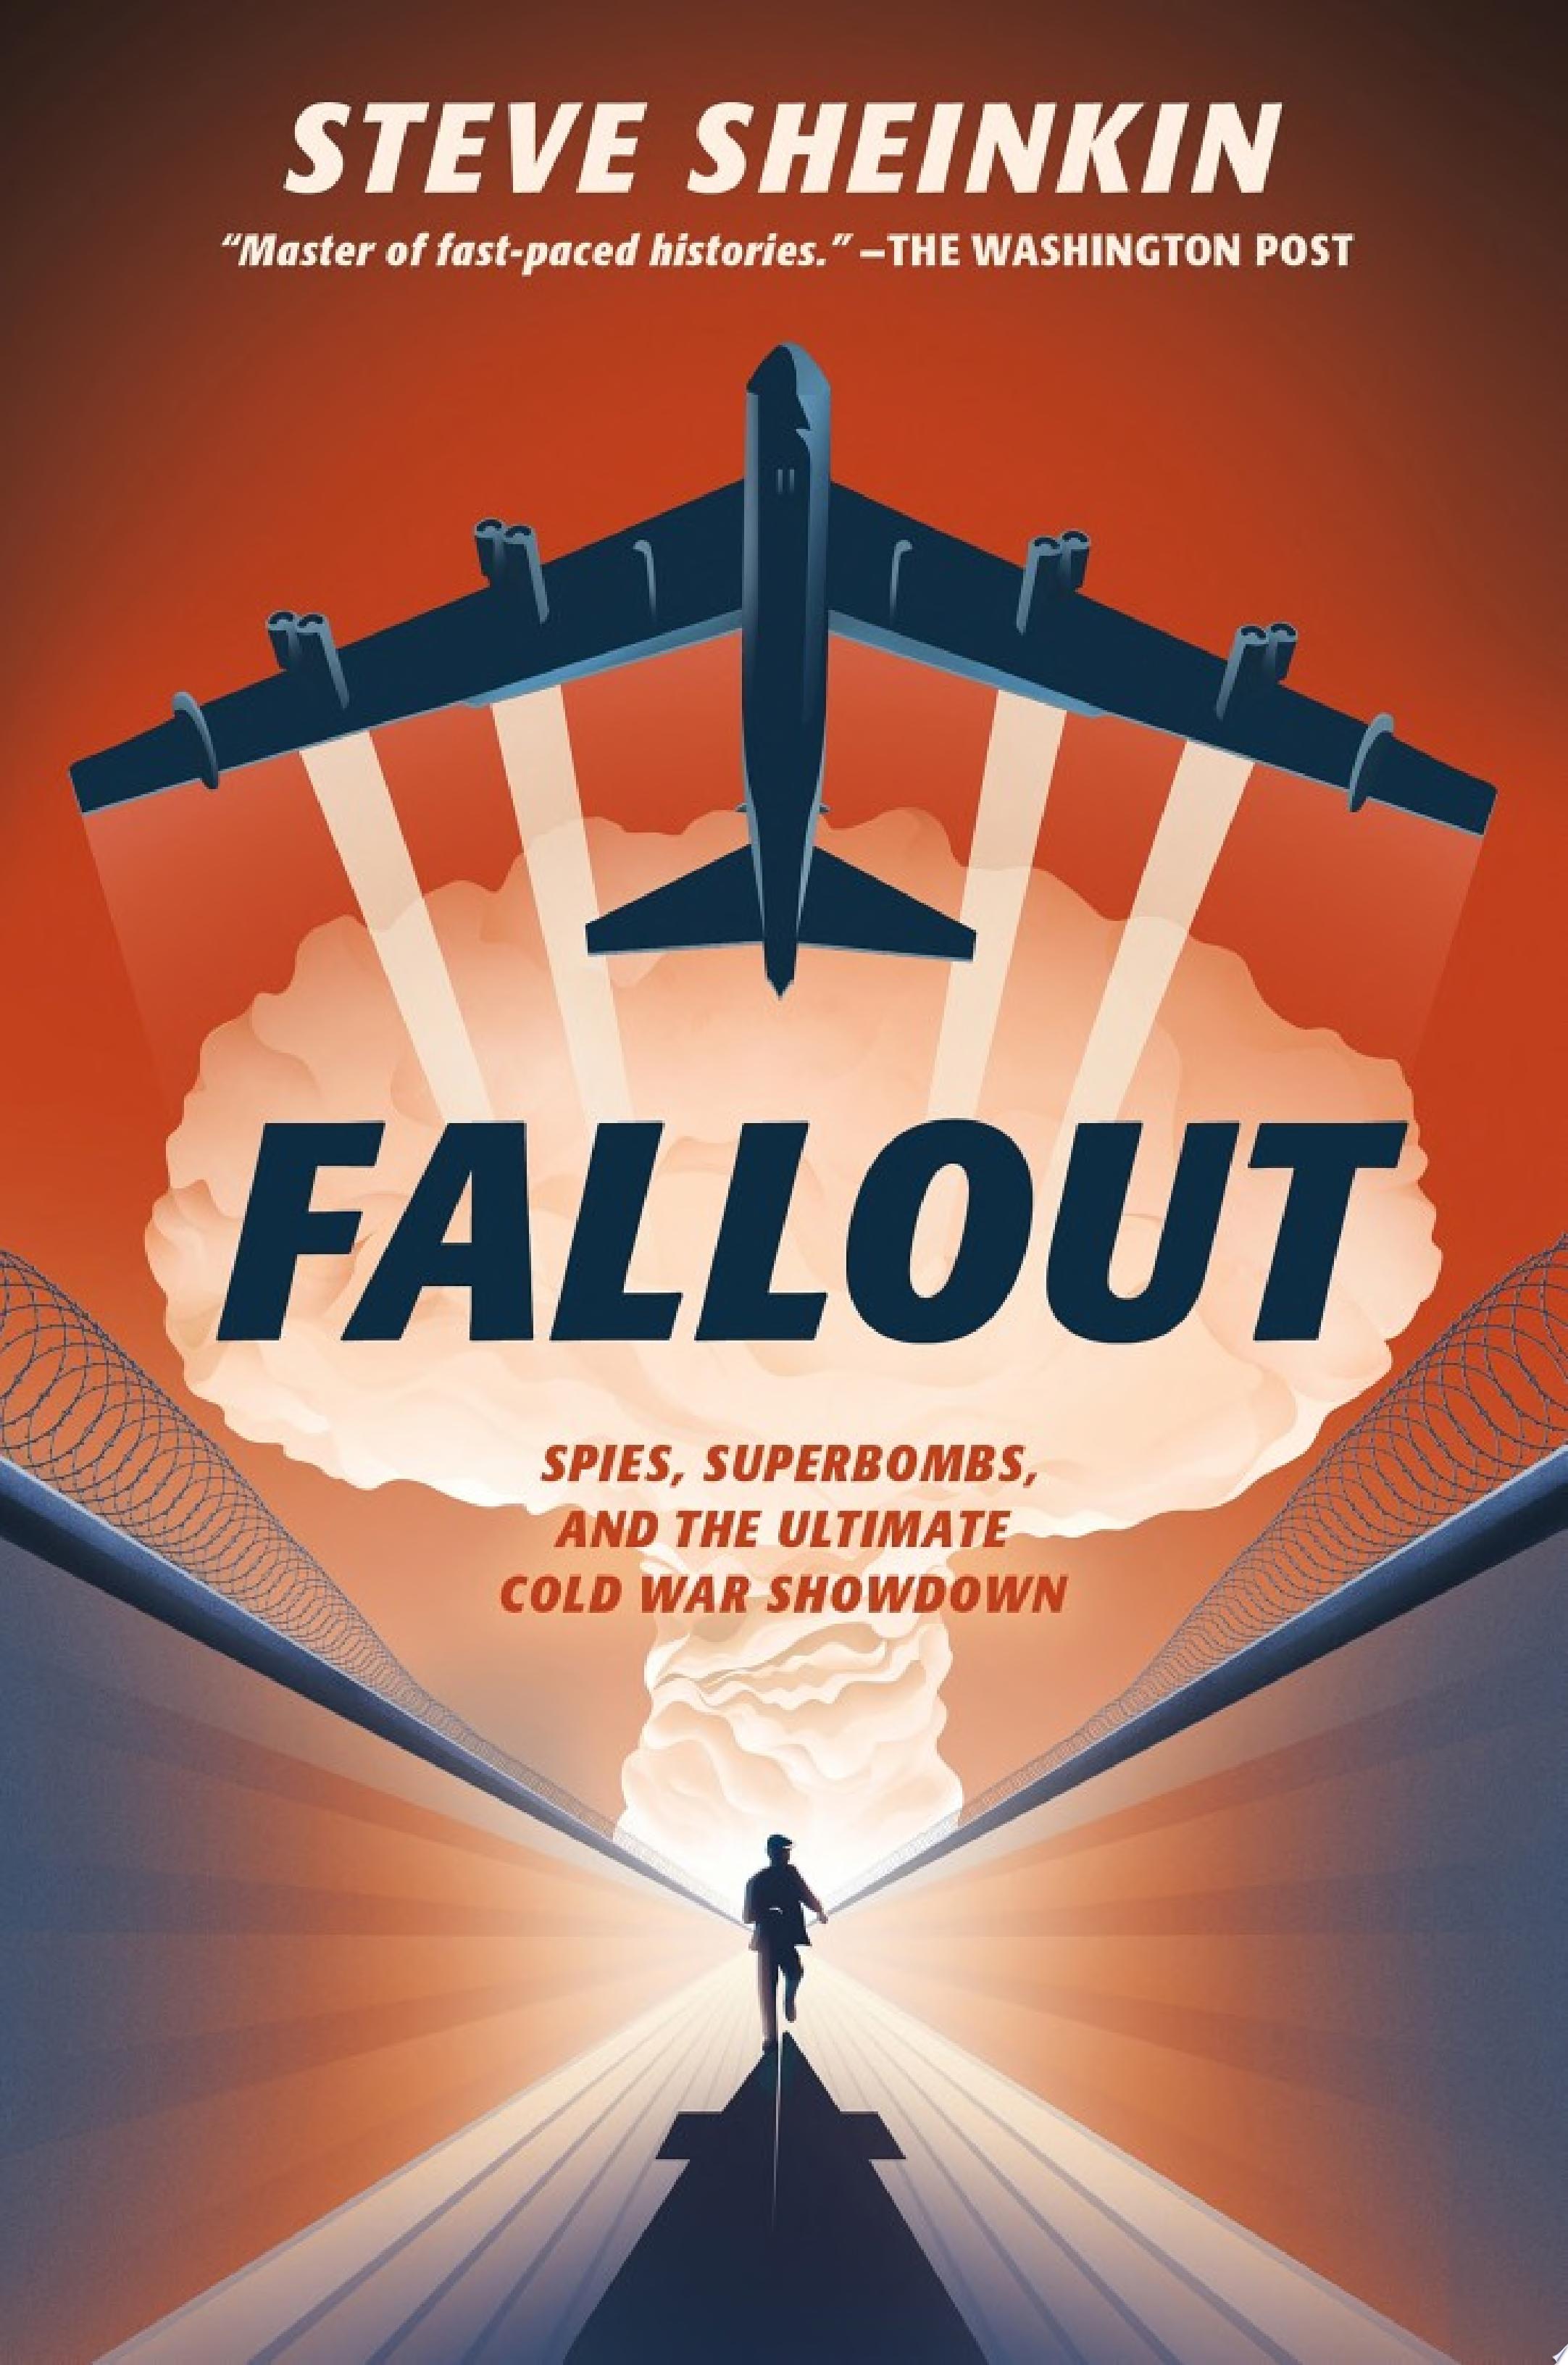 Image for "Fallout"